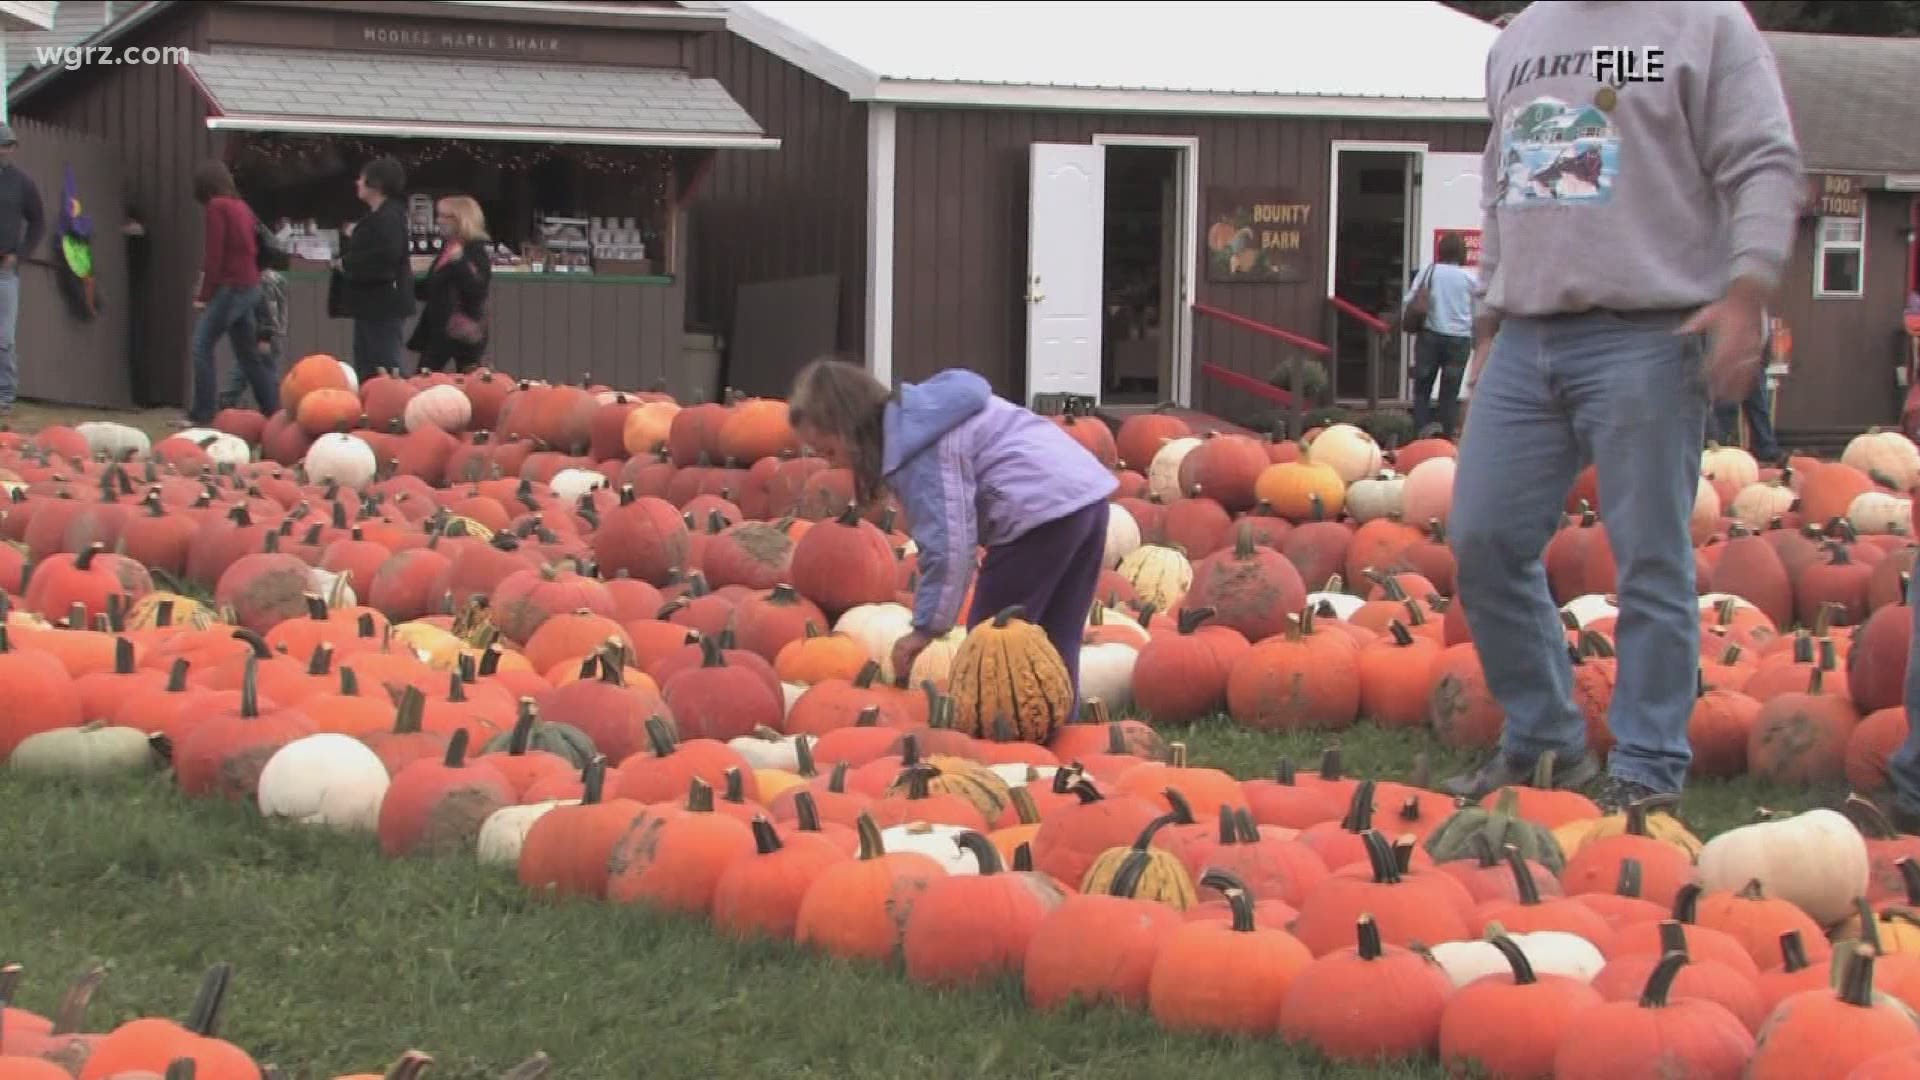 Pumpkinville announced Tuesday that it will be opening this weekend